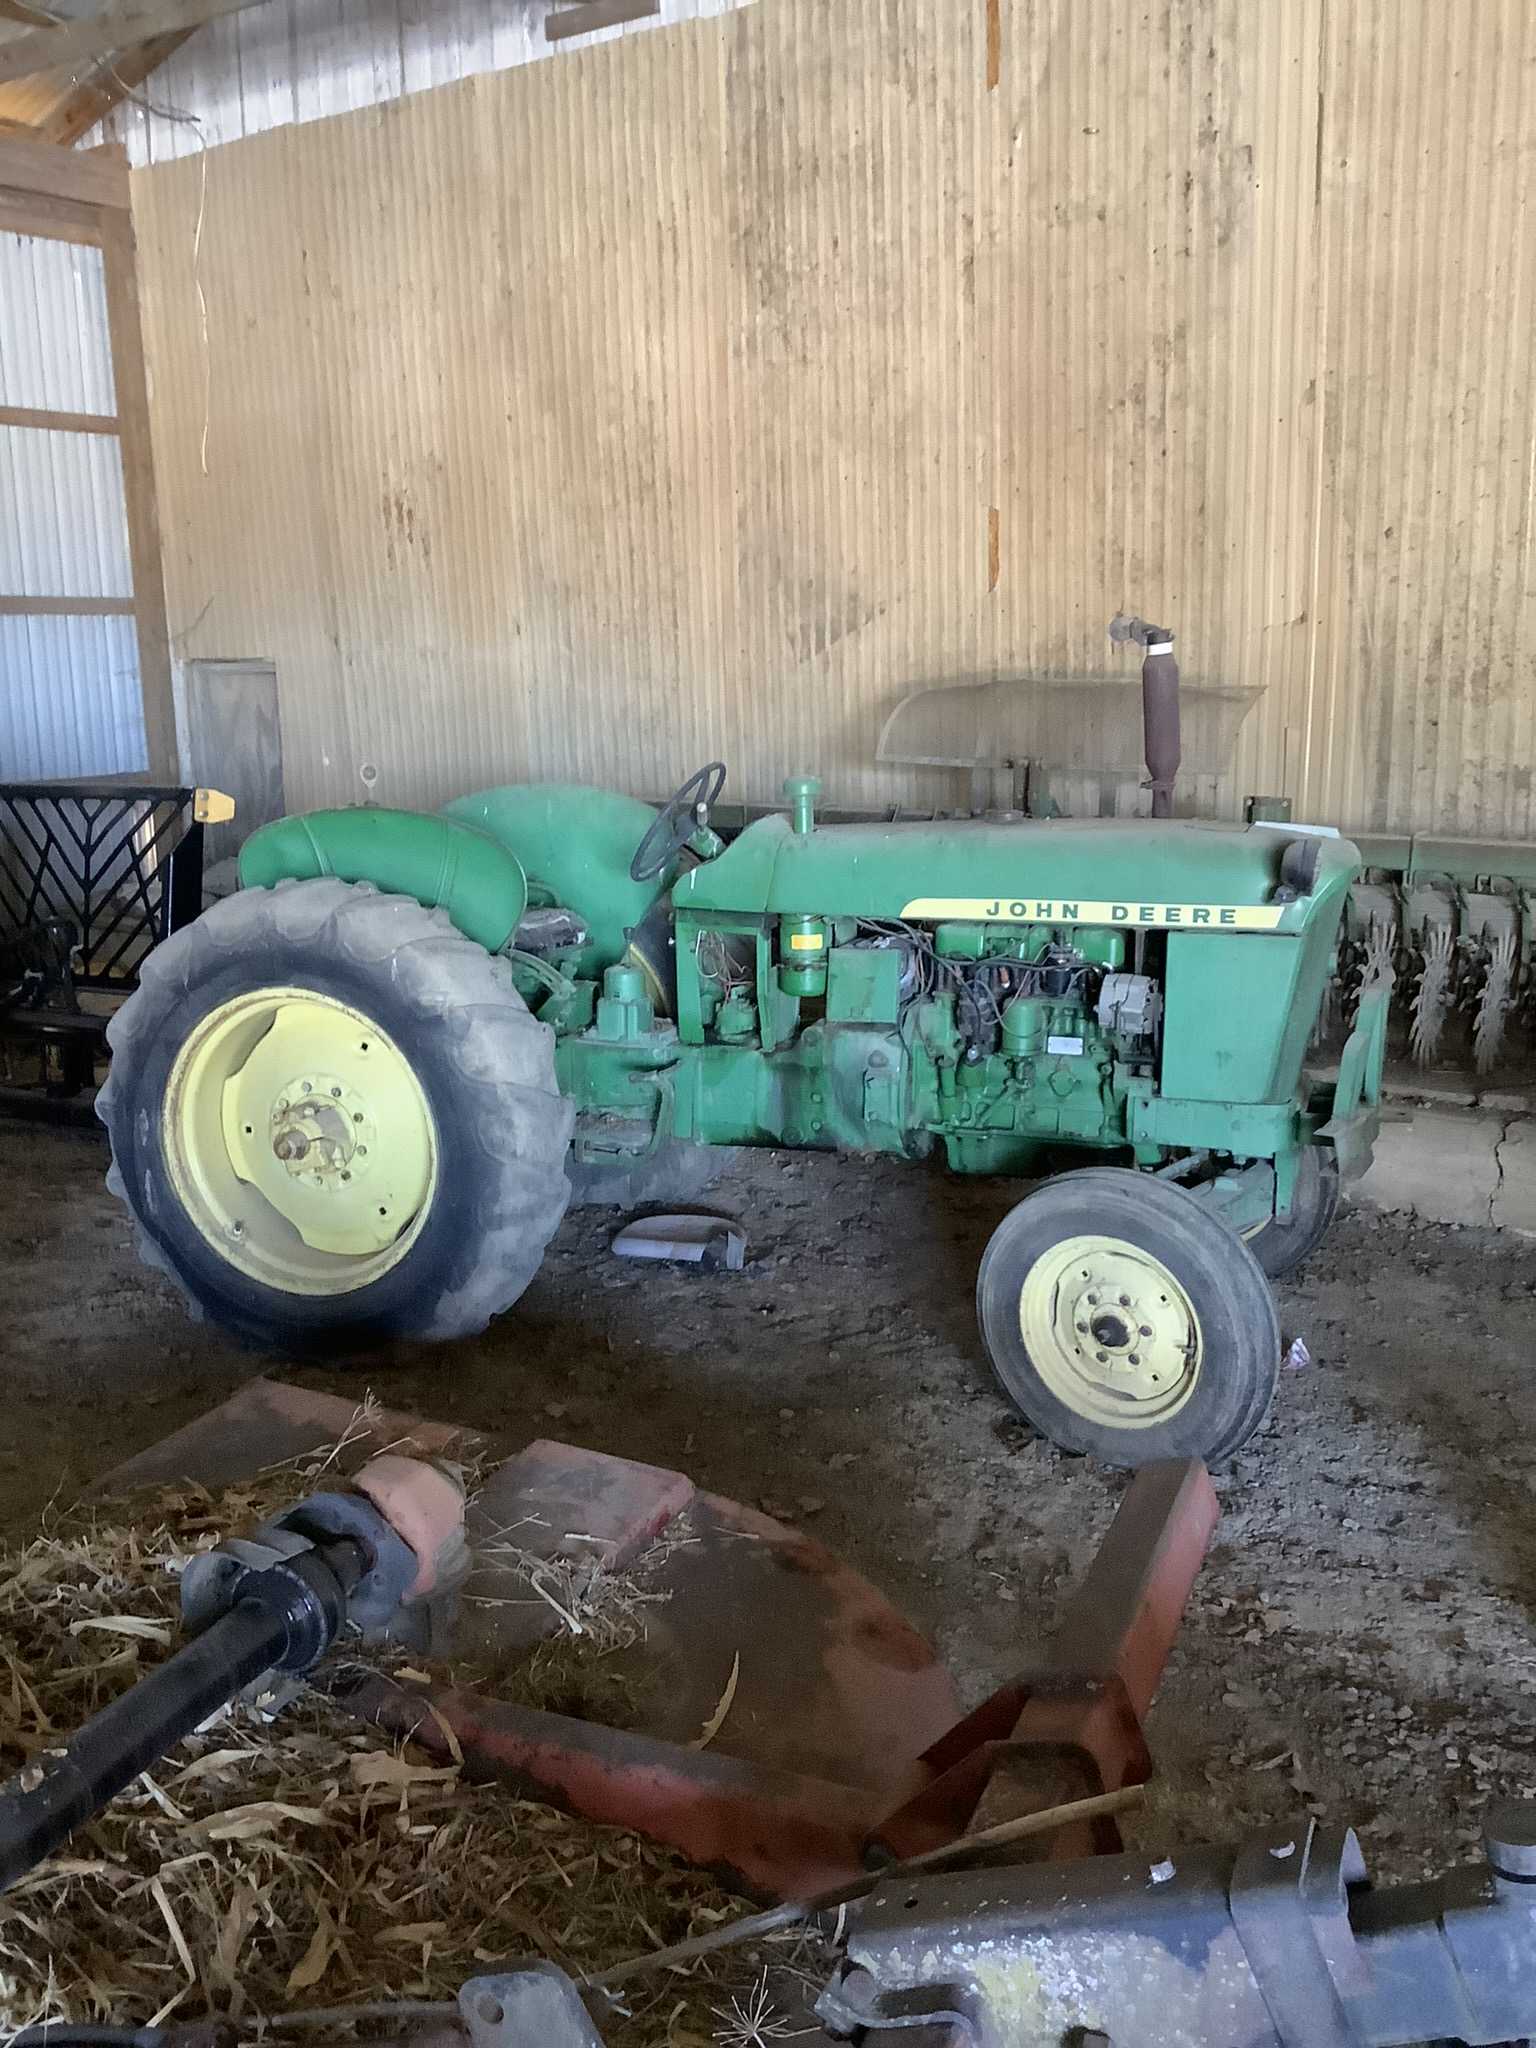 Auction teaser for TRACTORS, IH PAYLOADER, FARM EQUIP, FURNITURE, DISNEY COLLECTION